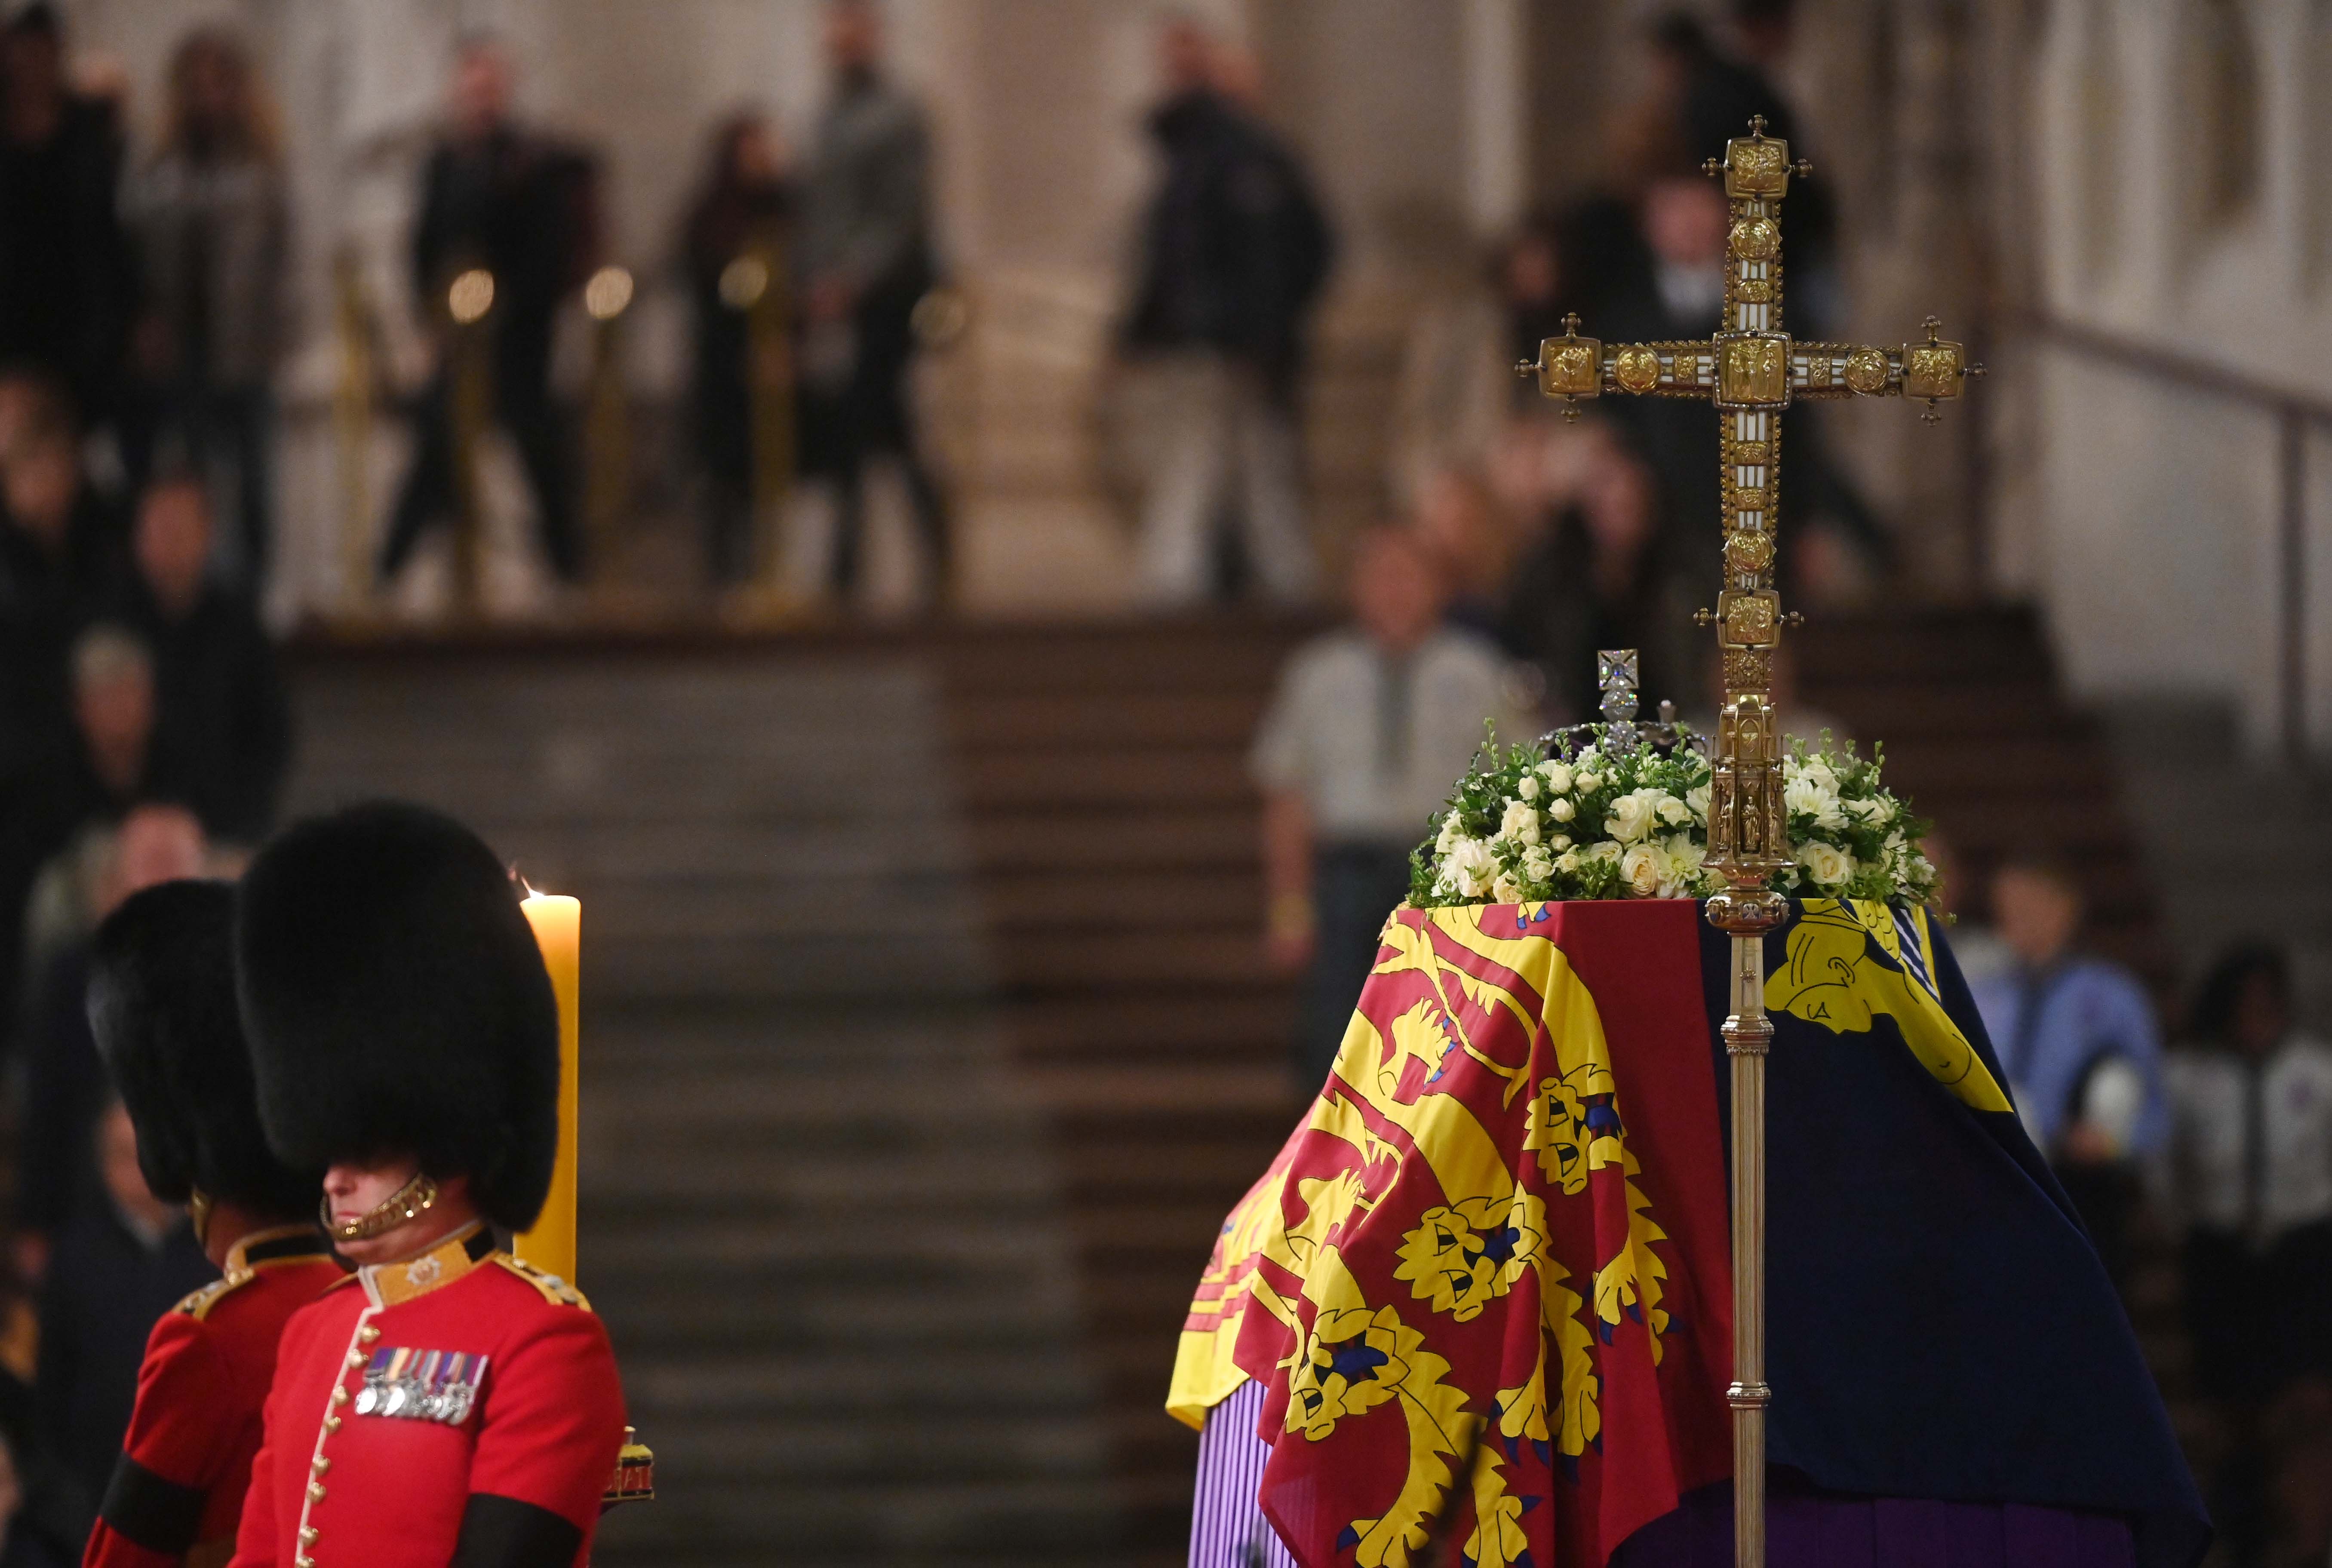 Members of the armed forces guard the coffin of Queen Elizabeth II